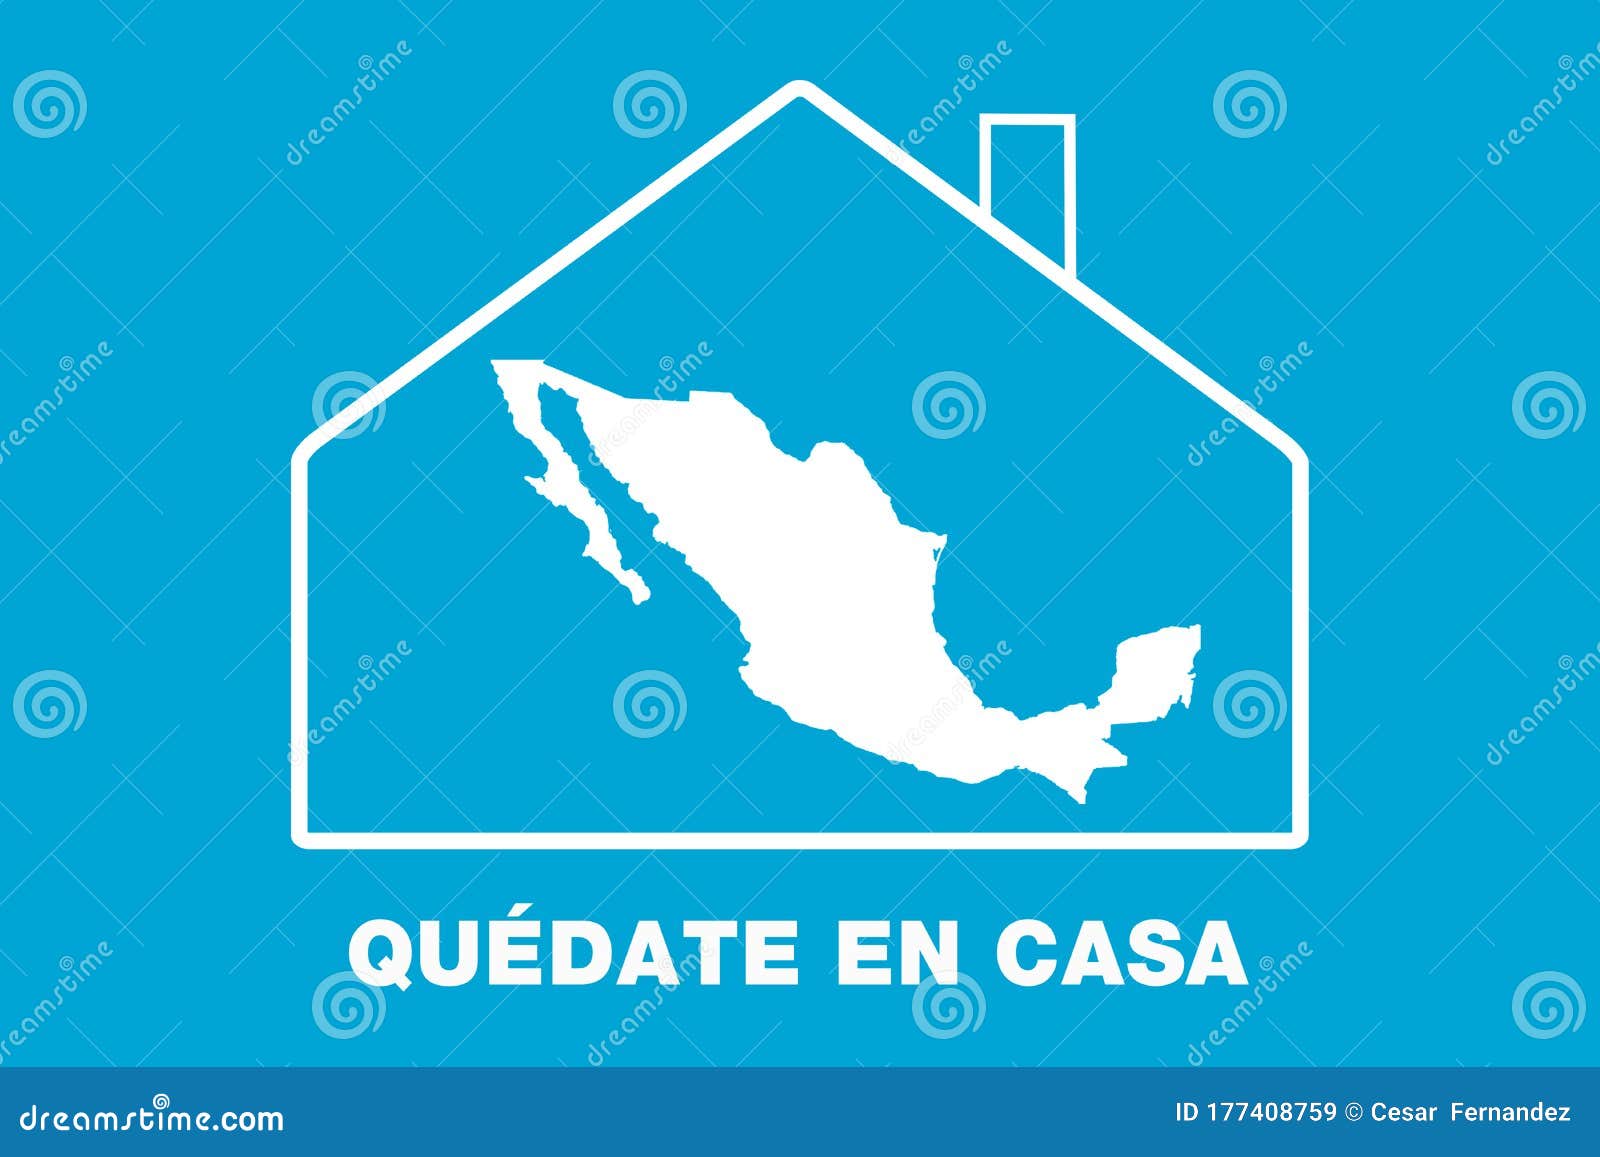  in concept of quarantine in all mexico to avoid covid-19 or coronavirus. with the phrase in spanish quedate en casa